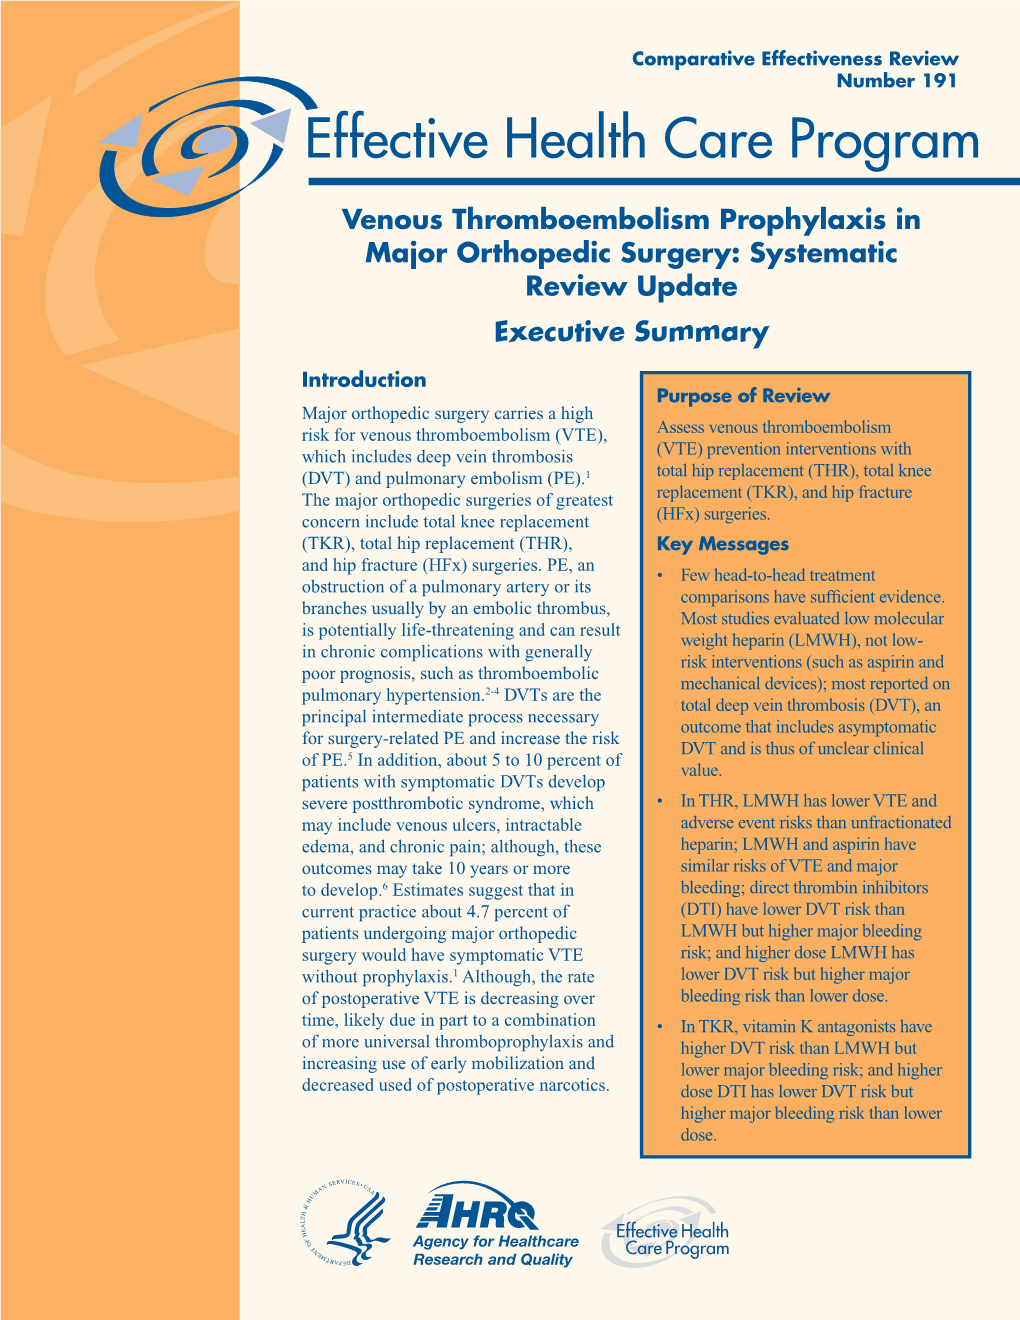 Venous Thromboembolism Prophylaxis in Major Orthopedic Surgery: Systematic Review Update Executive Summary